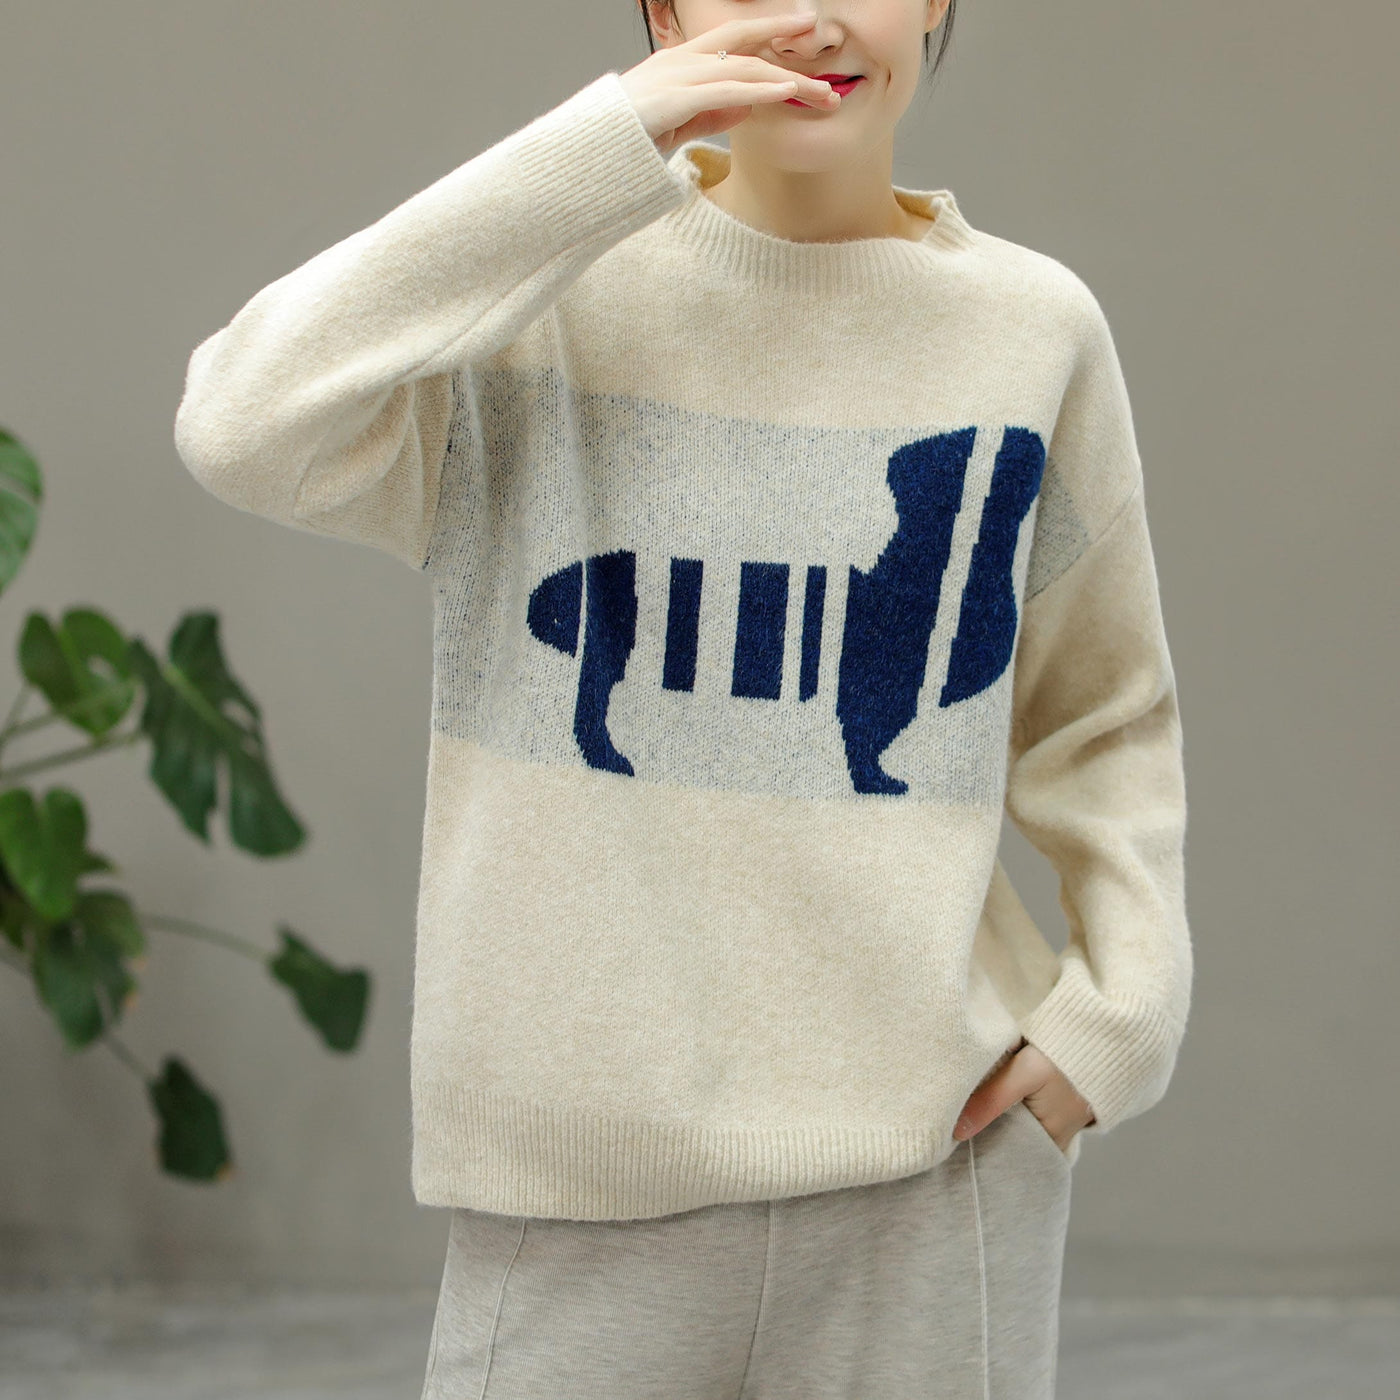 Women Casual Fashion Knitted Winter Sweater Dec 2022 New Arrival One Size White 